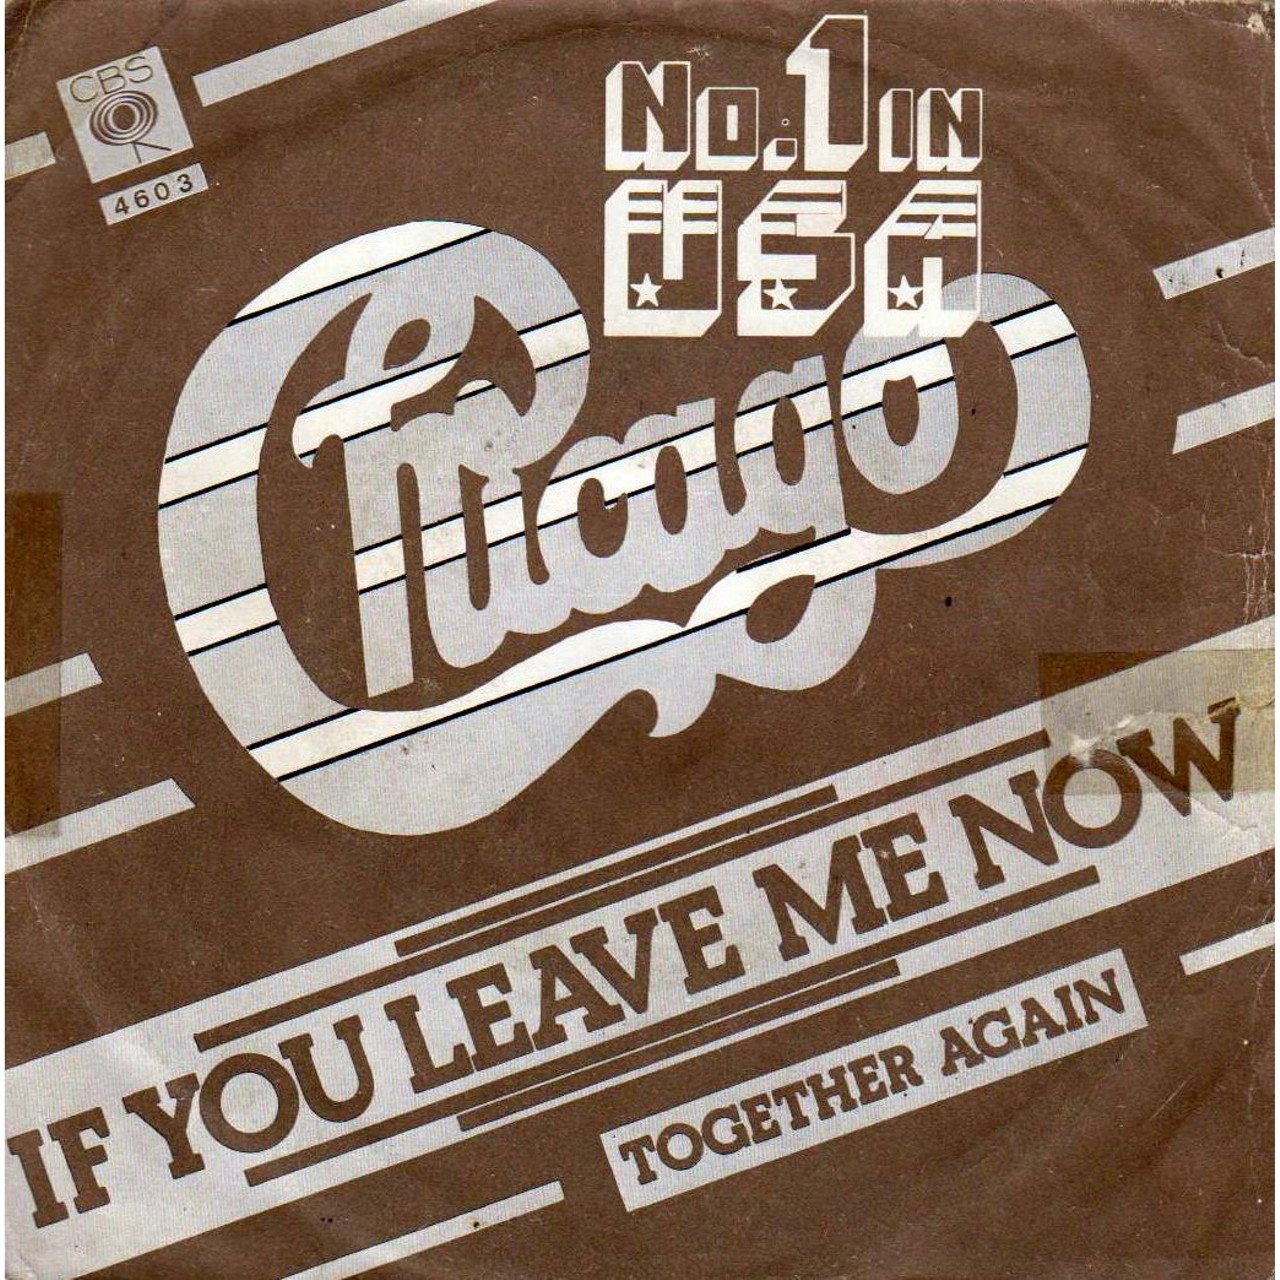 A number 1 from their album "Chicago X," "If You Leave Me Now" was released in 1976. It was the group's first No. 1 hit and topped charts for two weeks. It was also the band's biggest hit world, with the song topping charts in Australia, Canada, The Netherlands and the UK. It reached No. 2 in Belgium, New Zealand and Sweden, and No. 3 in Austria, Germany and Switzerland, and No. 4 in Norway.